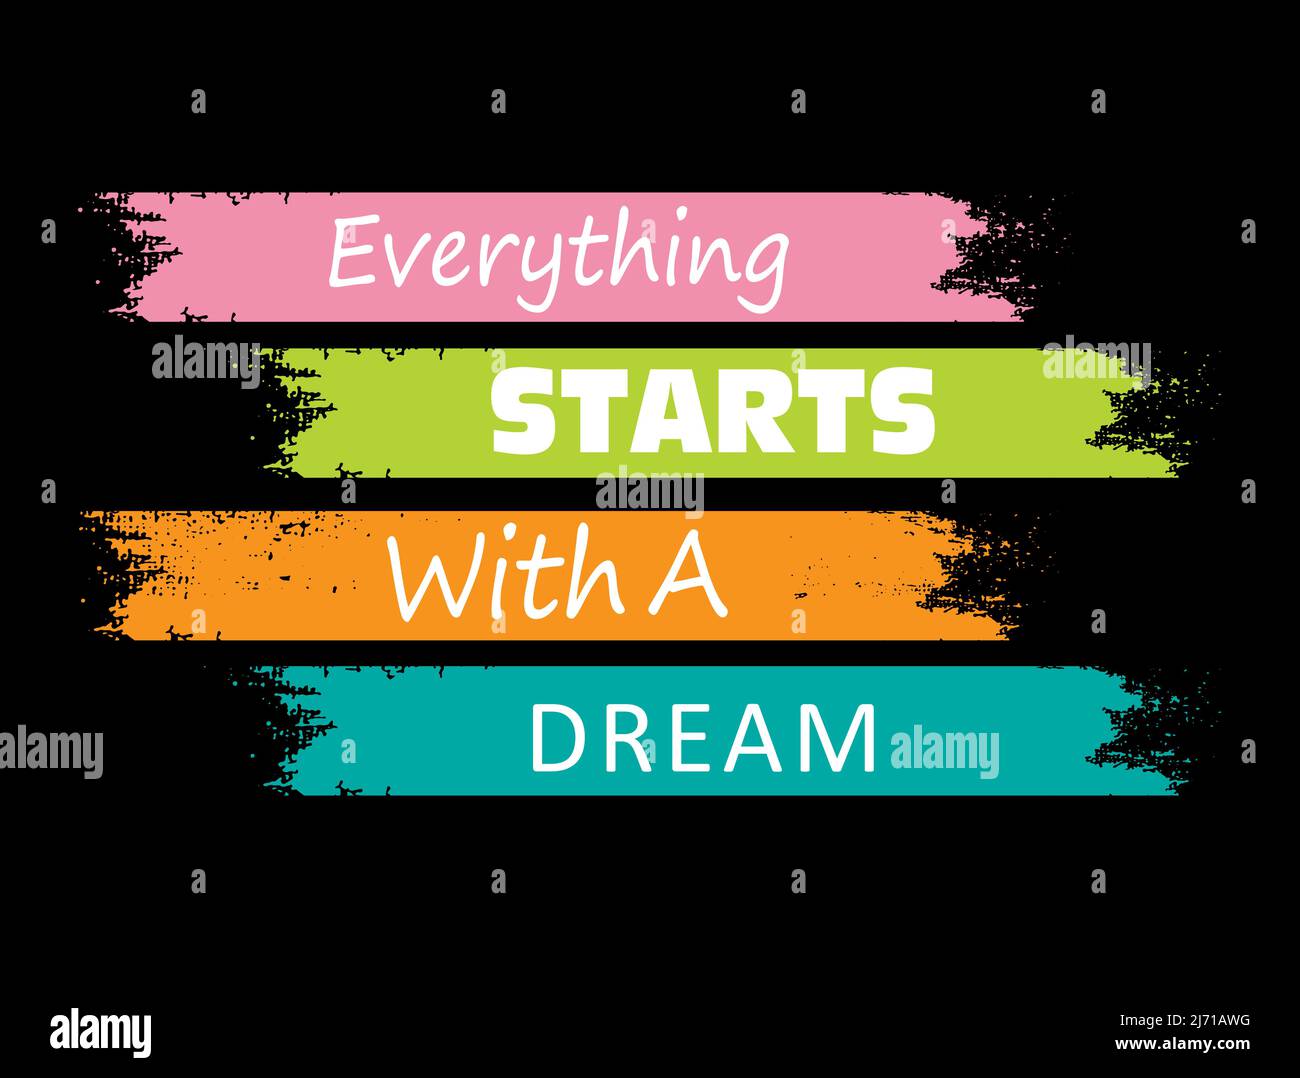 Everything Starts With A Dream Colorful Inspirational Stylish Typography Stock Vector